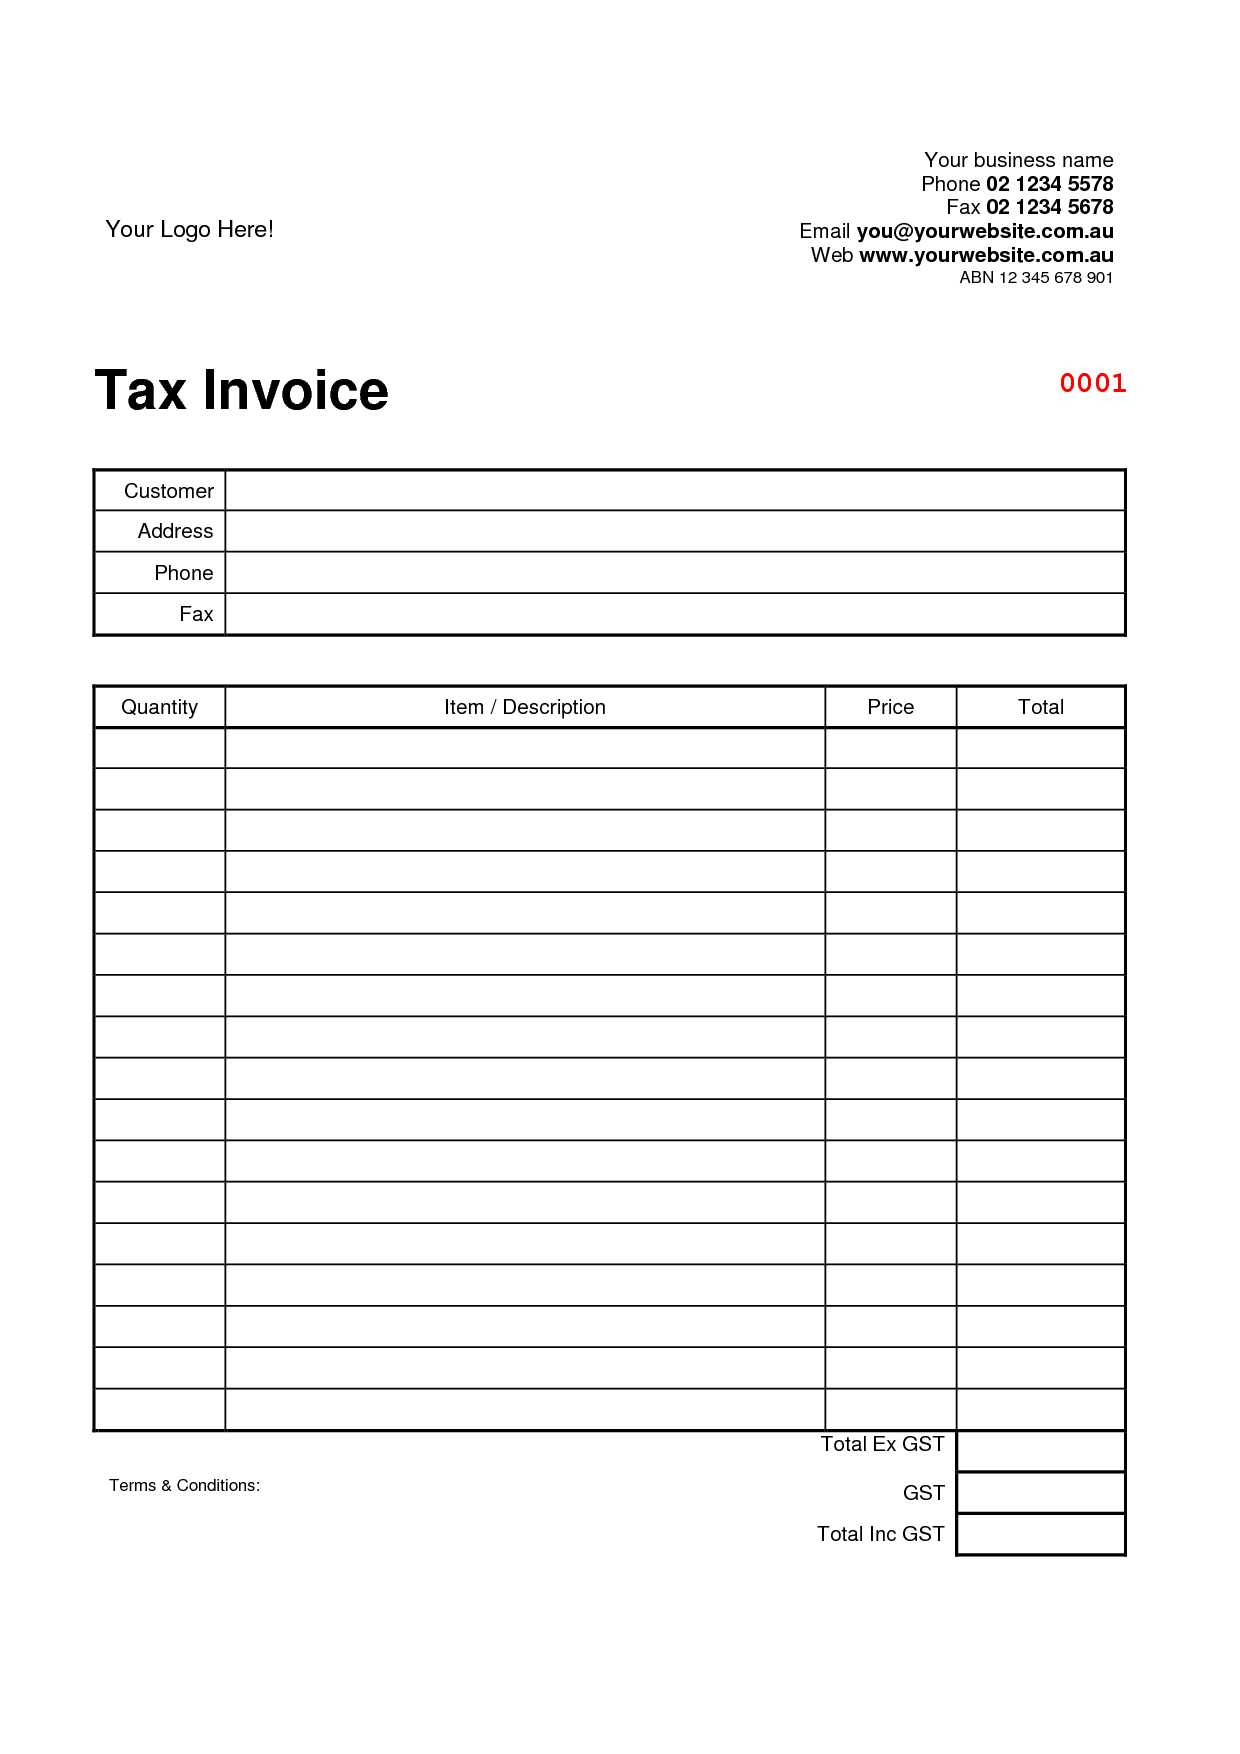 Excel Worksheet Download Along with Copy A Blank Invoice Invoice Template Free 2016 Copy Blank